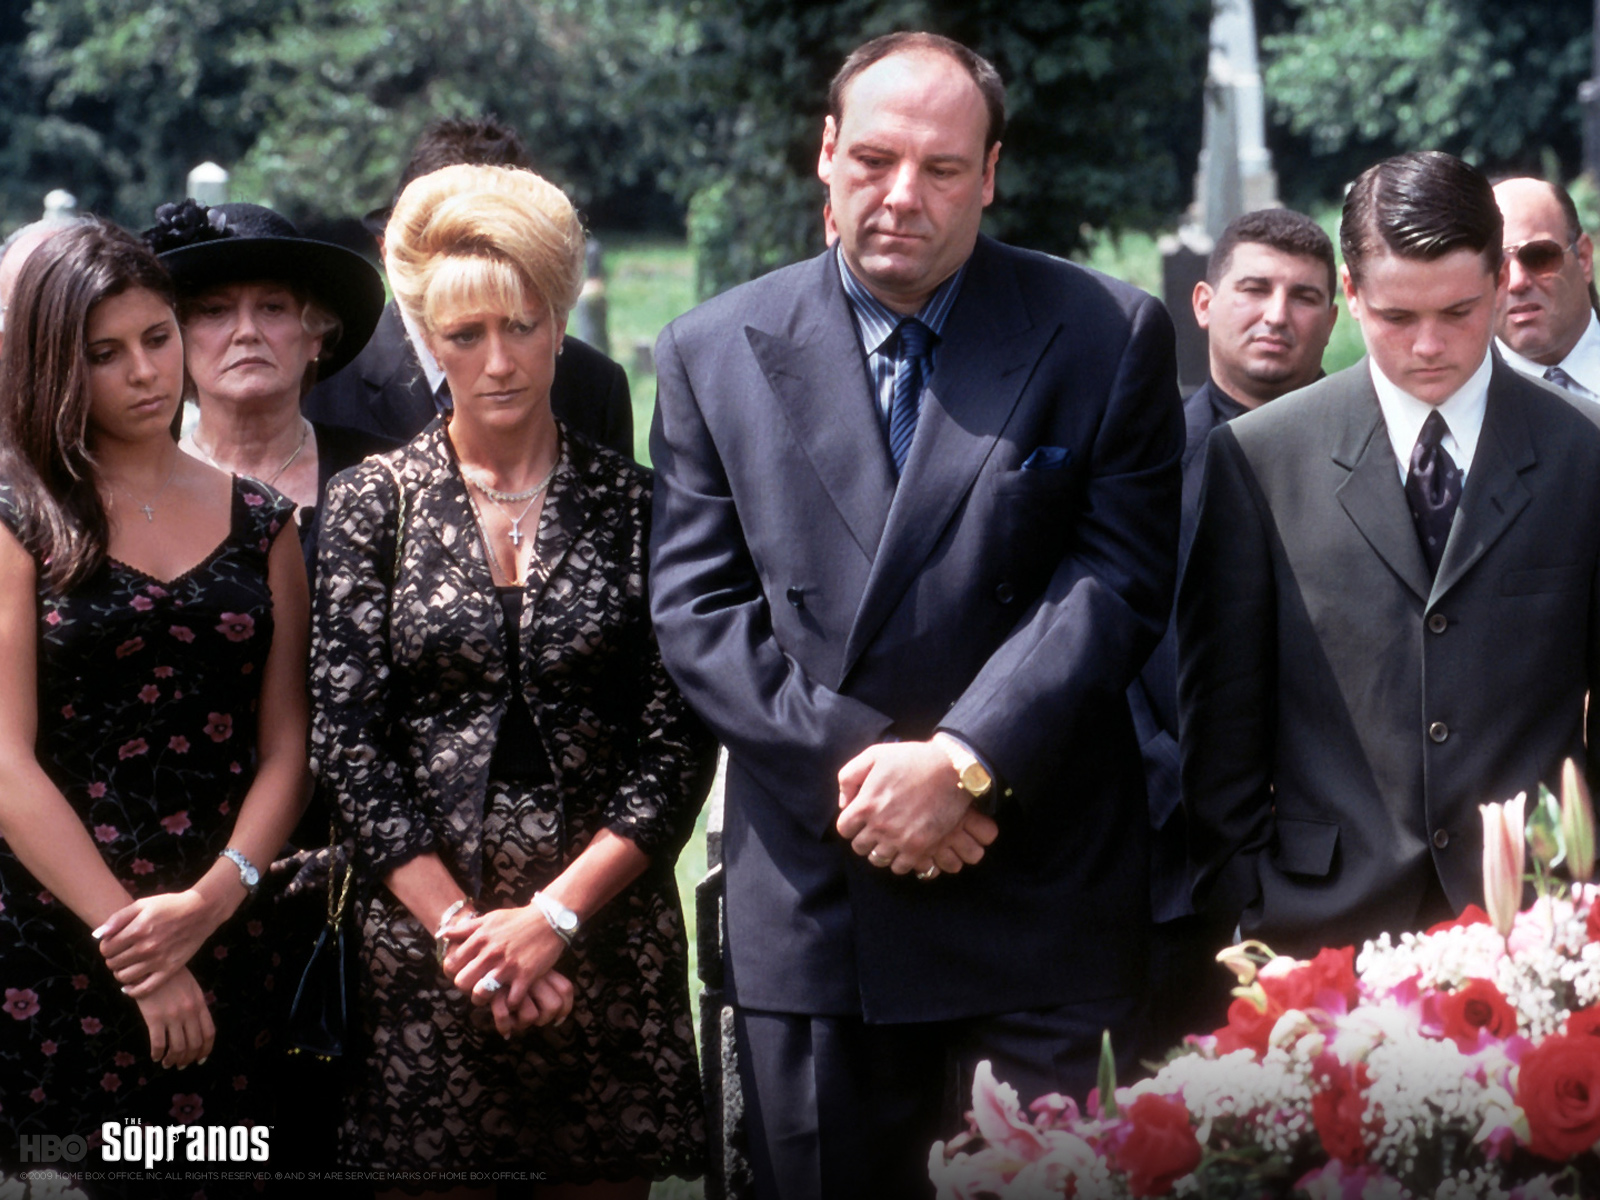 The Sopranos Crew - Funeral Scene The Godfather , HD Wallpaper & Backgrounds